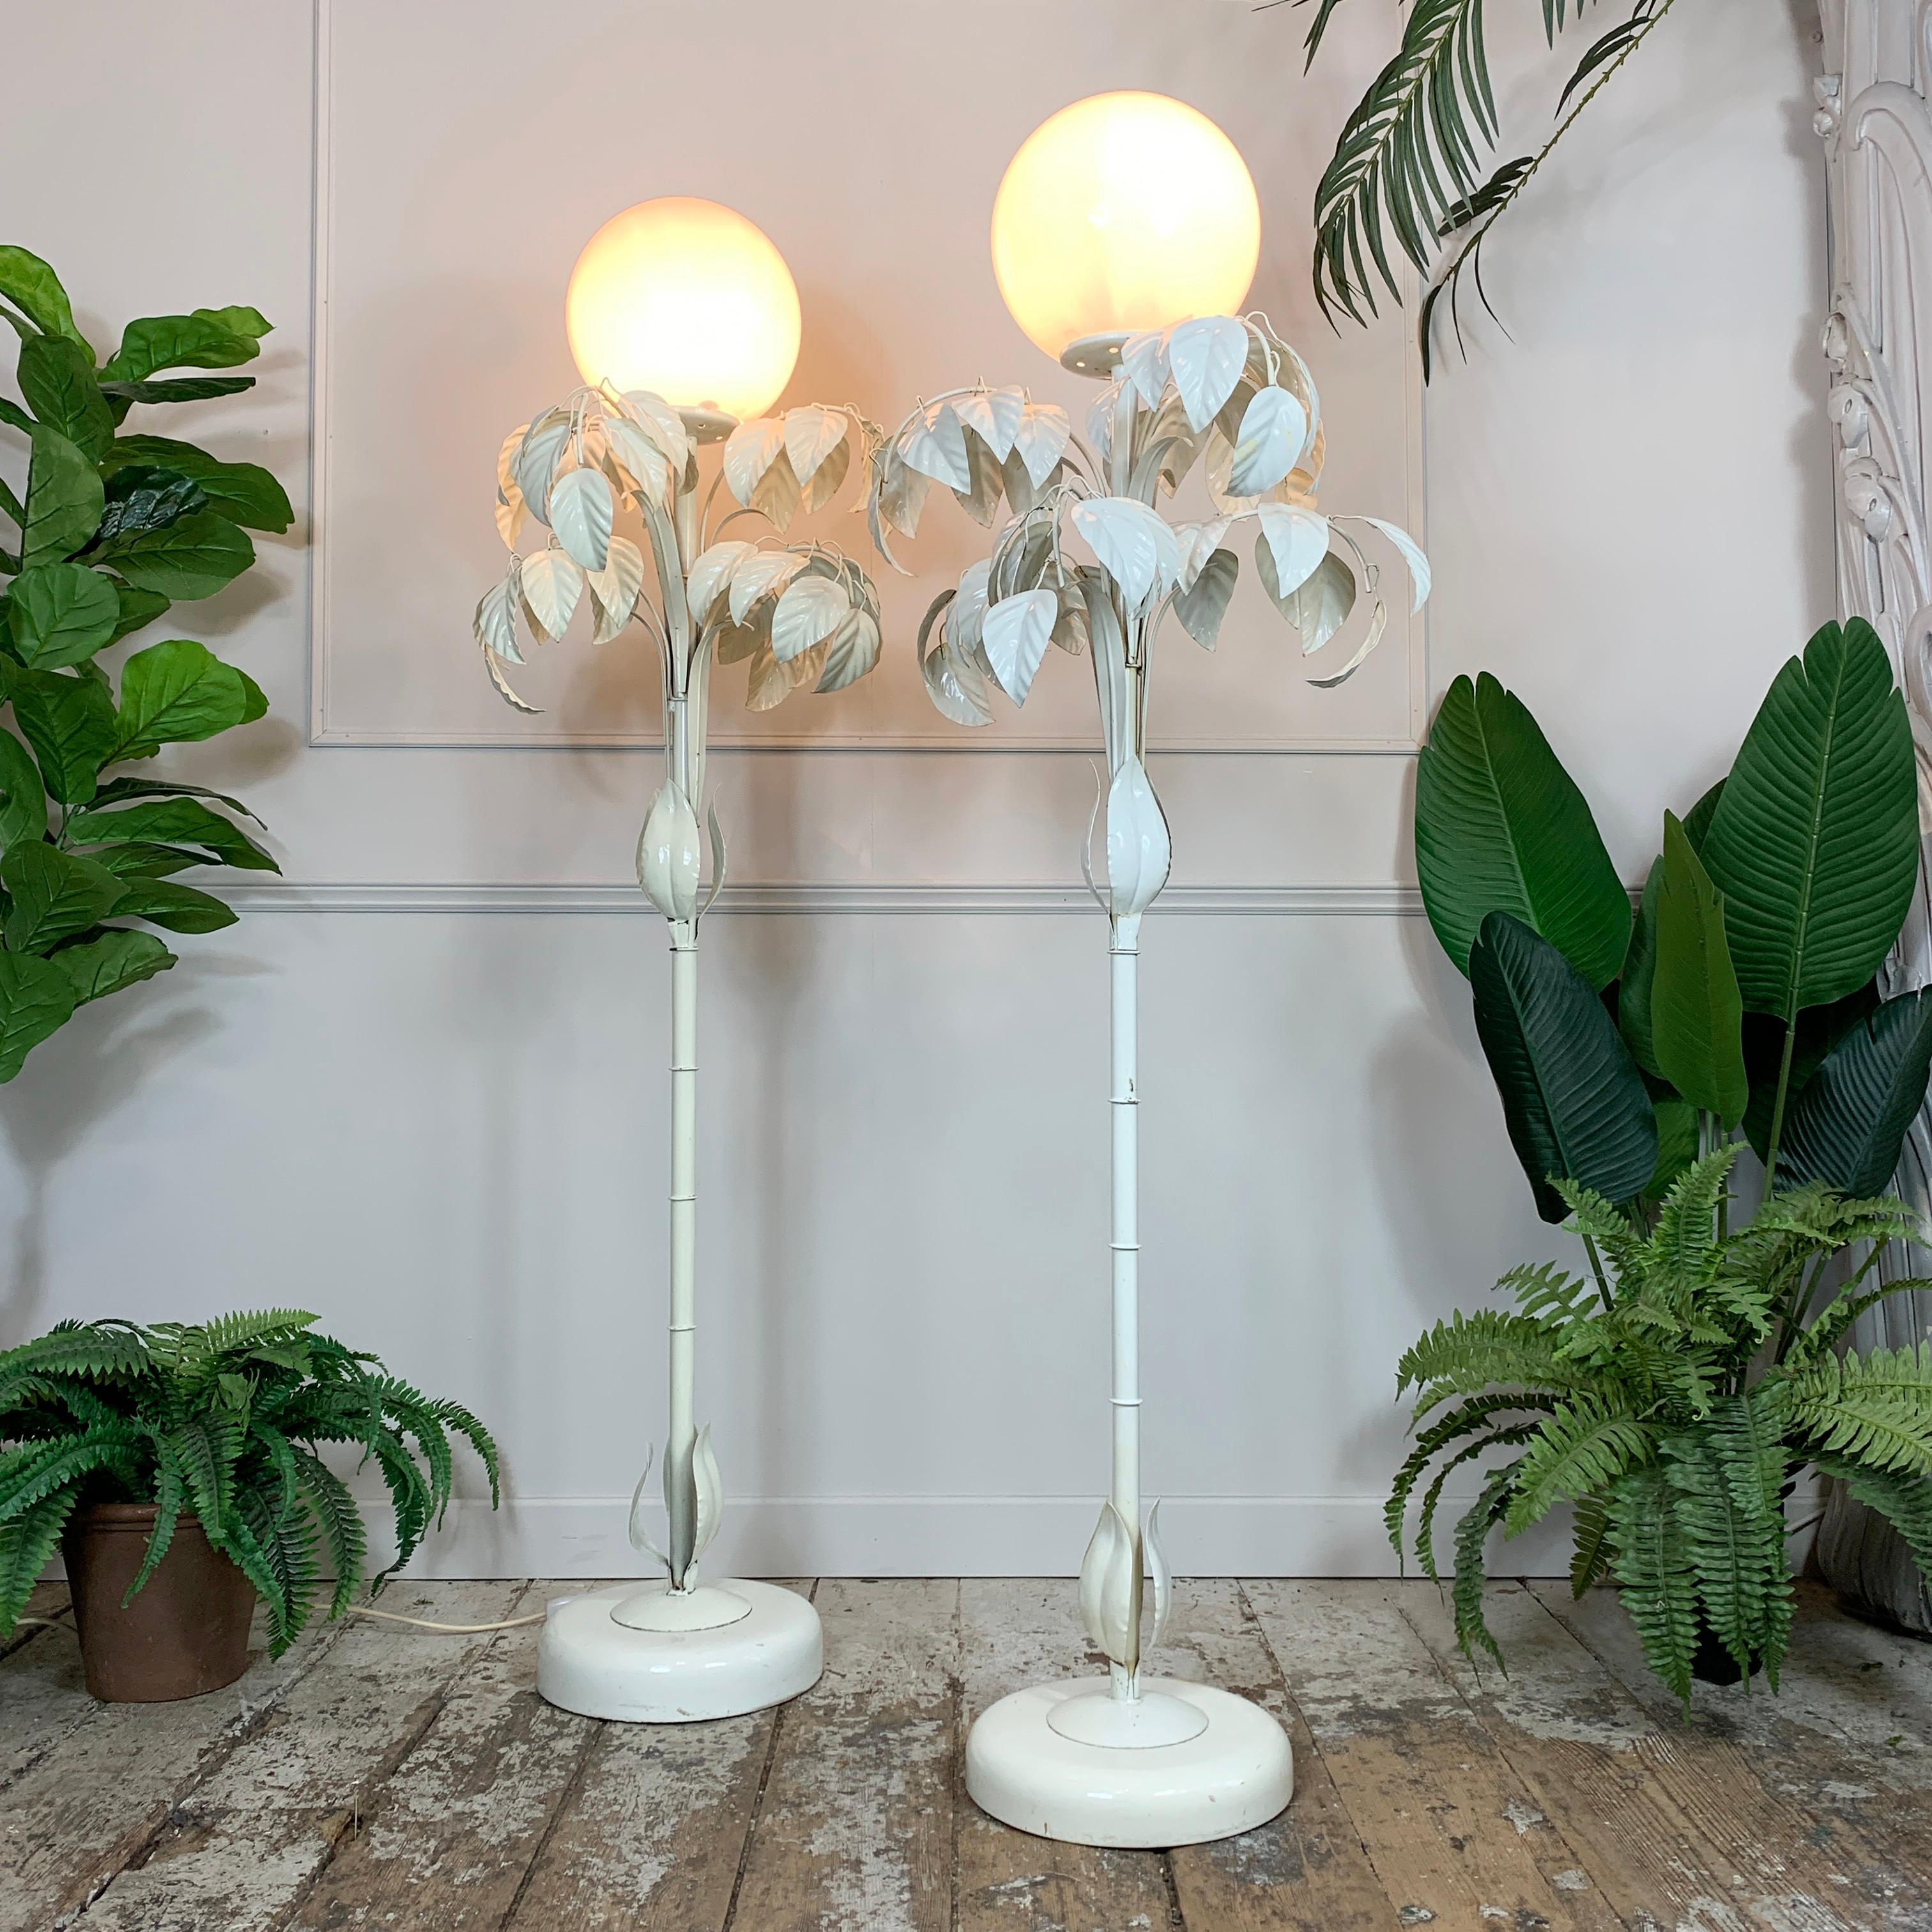 A spectacular Pair of 1970’s Sergio Terzani Italian white enamel floor lamps, a canopy of leaves and branches surround the large glass globe light fitting, making this lamp an impressive addition to any setting.

Measures: Height 158cm Tall x 50cm